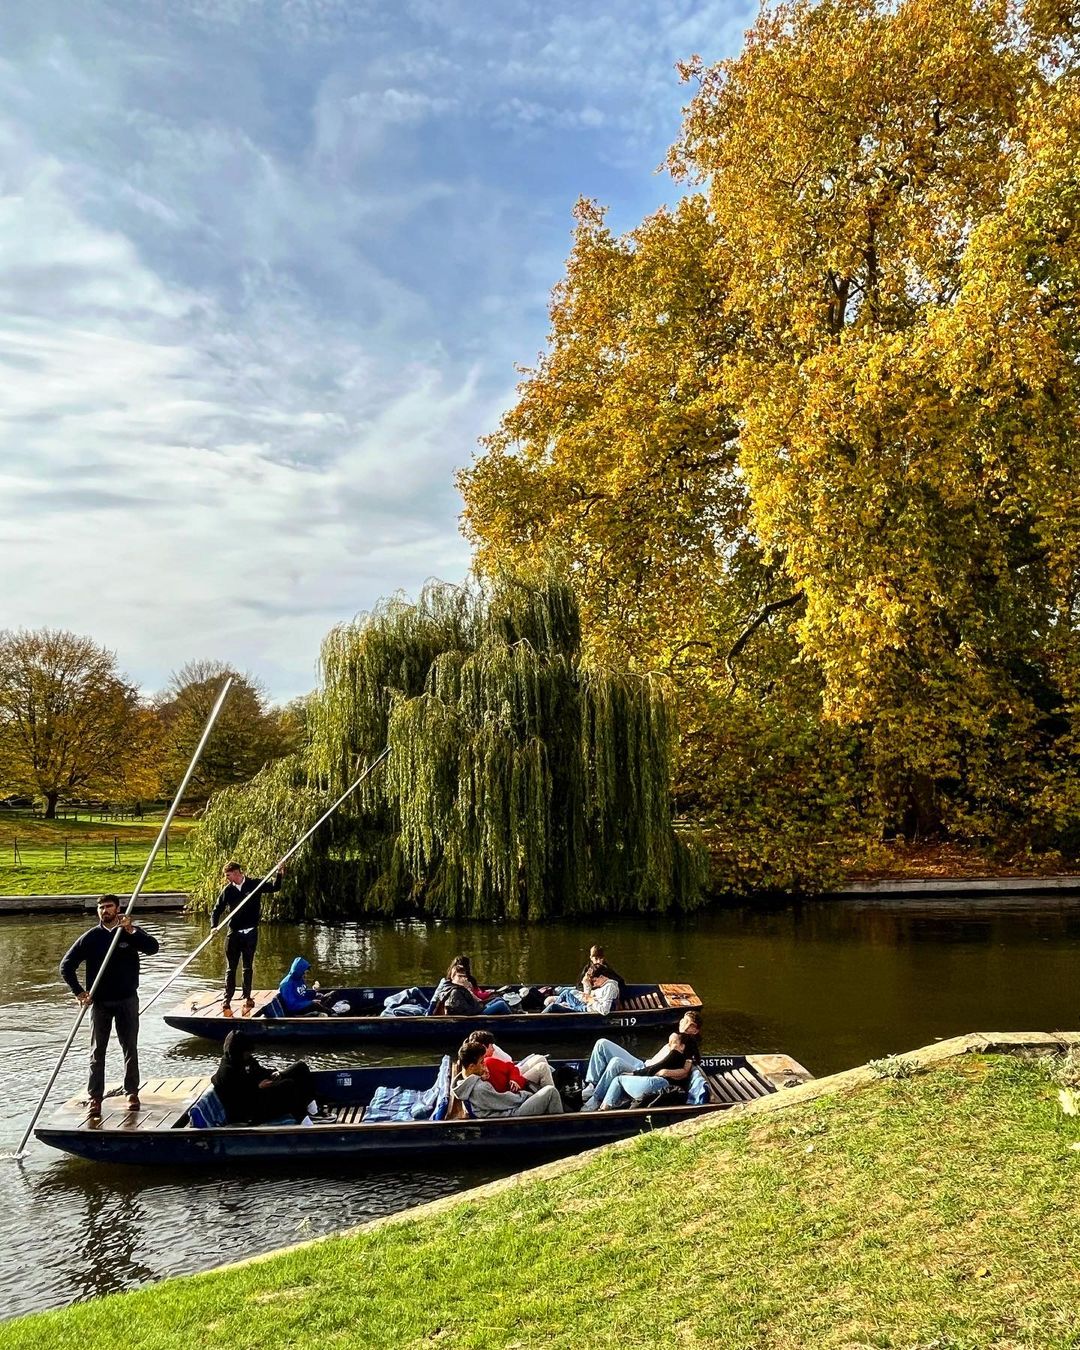 People boating on the River Cam.